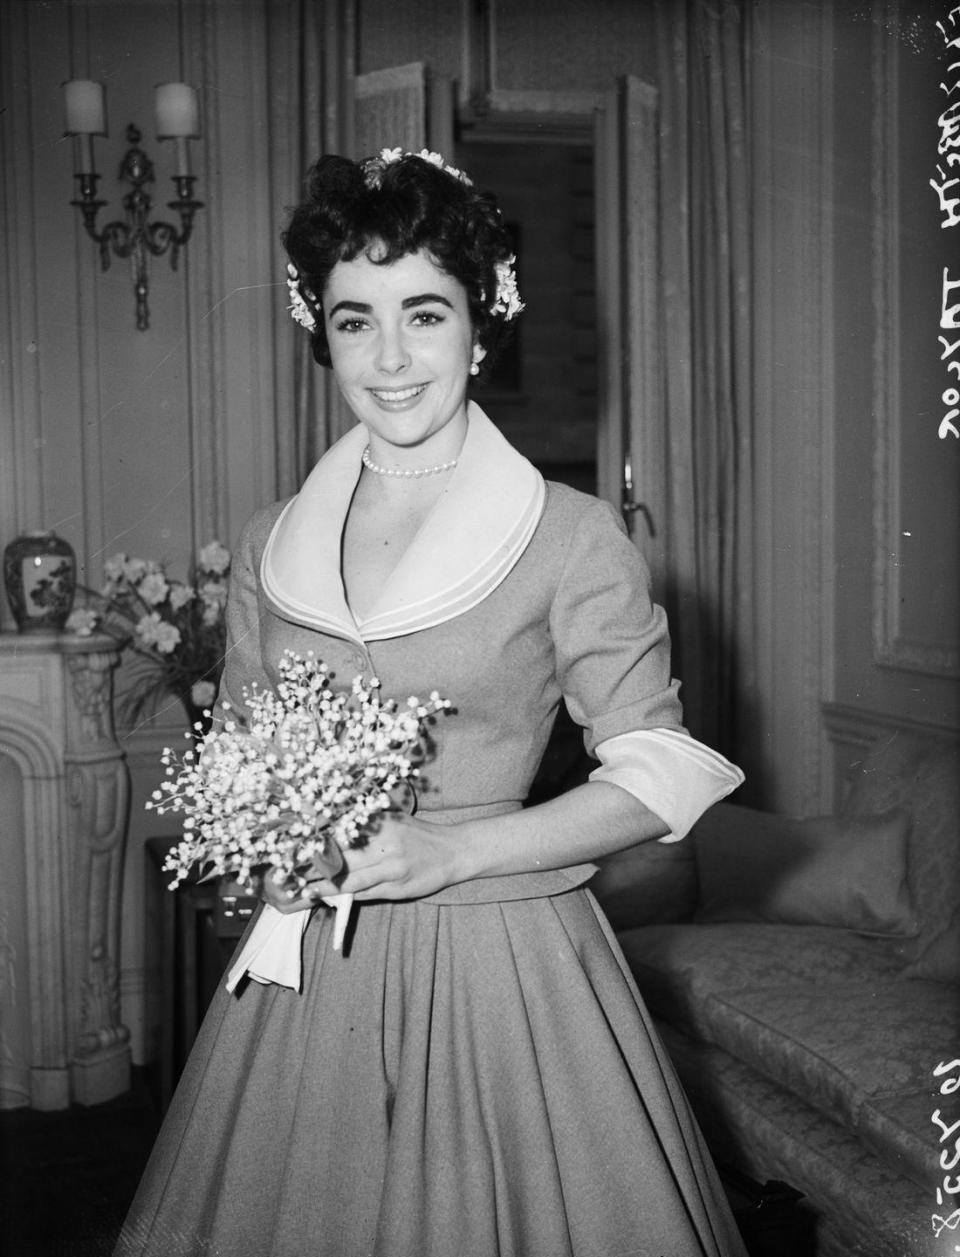 <p>While she wore several gowns for her many marriages, Elizabeth Taylor's first unconventional dress was this simple suit for her 1952 wedding to her second husband, Michael Wilding.</p>